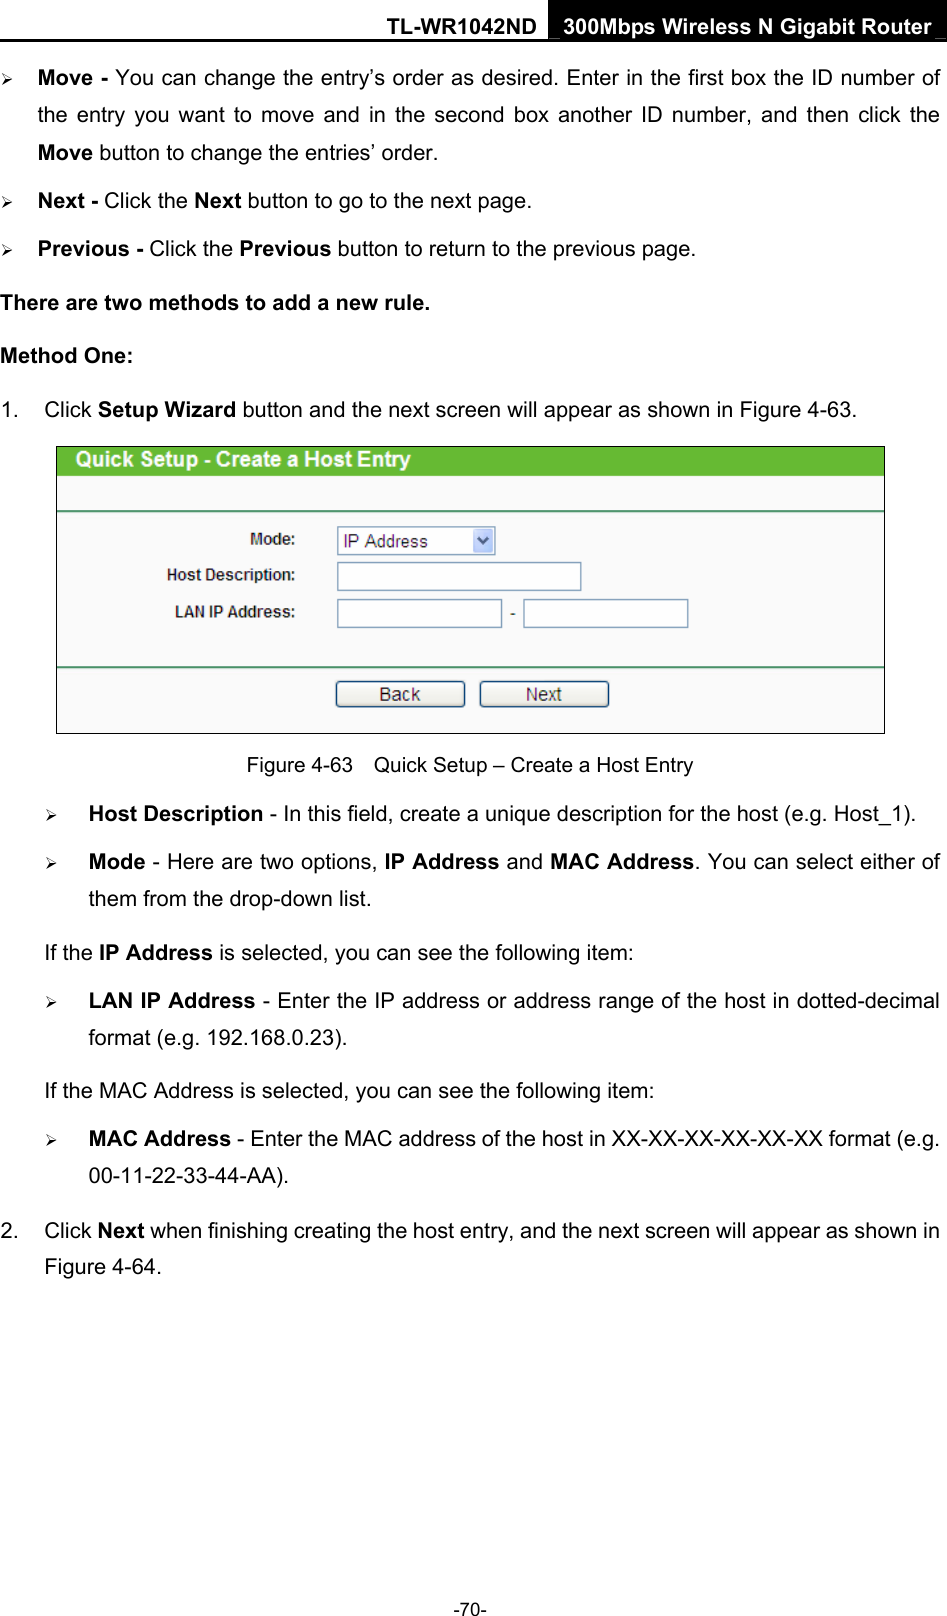 TL-WR1042ND 300Mbps Wireless N Gigabit Router -70- ¾ Move - You can change the entry’s order as desired. Enter in the first box the ID number of the entry you want to move and in the second box another ID number, and then click the Move button to change the entries’ order. ¾ Next - Click the Next button to go to the next page. ¾ Previous - Click the Previous button to return to the previous page. There are two methods to add a new rule. Method One: 1. Click Setup Wizard button and the next screen will appear as shown in Figure 4-63.  Figure 4-63    Quick Setup – Create a Host Entry ¾ Host Description - In this field, create a unique description for the host (e.g. Host_1).   ¾ Mode - Here are two options, IP Address and MAC Address. You can select either of them from the drop-down list.   If the IP Address is selected, you can see the following item: ¾ LAN IP Address - Enter the IP address or address range of the host in dotted-decimal format (e.g. 192.168.0.23).   If the MAC Address is selected, you can see the following item: ¾ MAC Address - Enter the MAC address of the host in XX-XX-XX-XX-XX-XX format (e.g. 00-11-22-33-44-AA).  2. Click Next when finishing creating the host entry, and the next screen will appear as shown in Figure 4-64. 